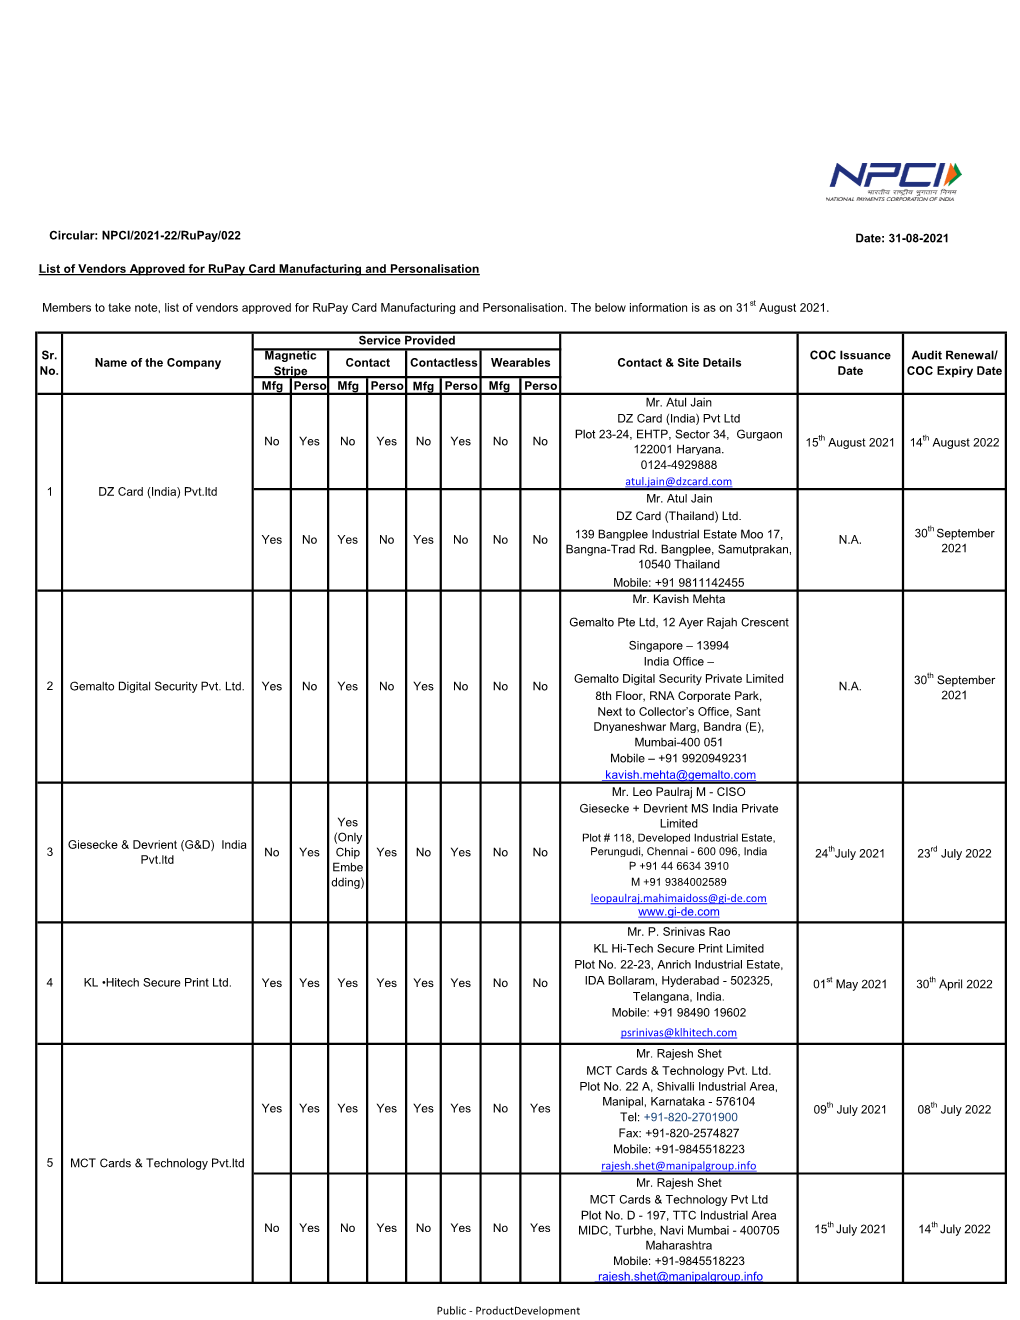 List-Of-Vendors-Of-Rupay-Approved-Card-Manufacturing-And-Personalization.Pdf